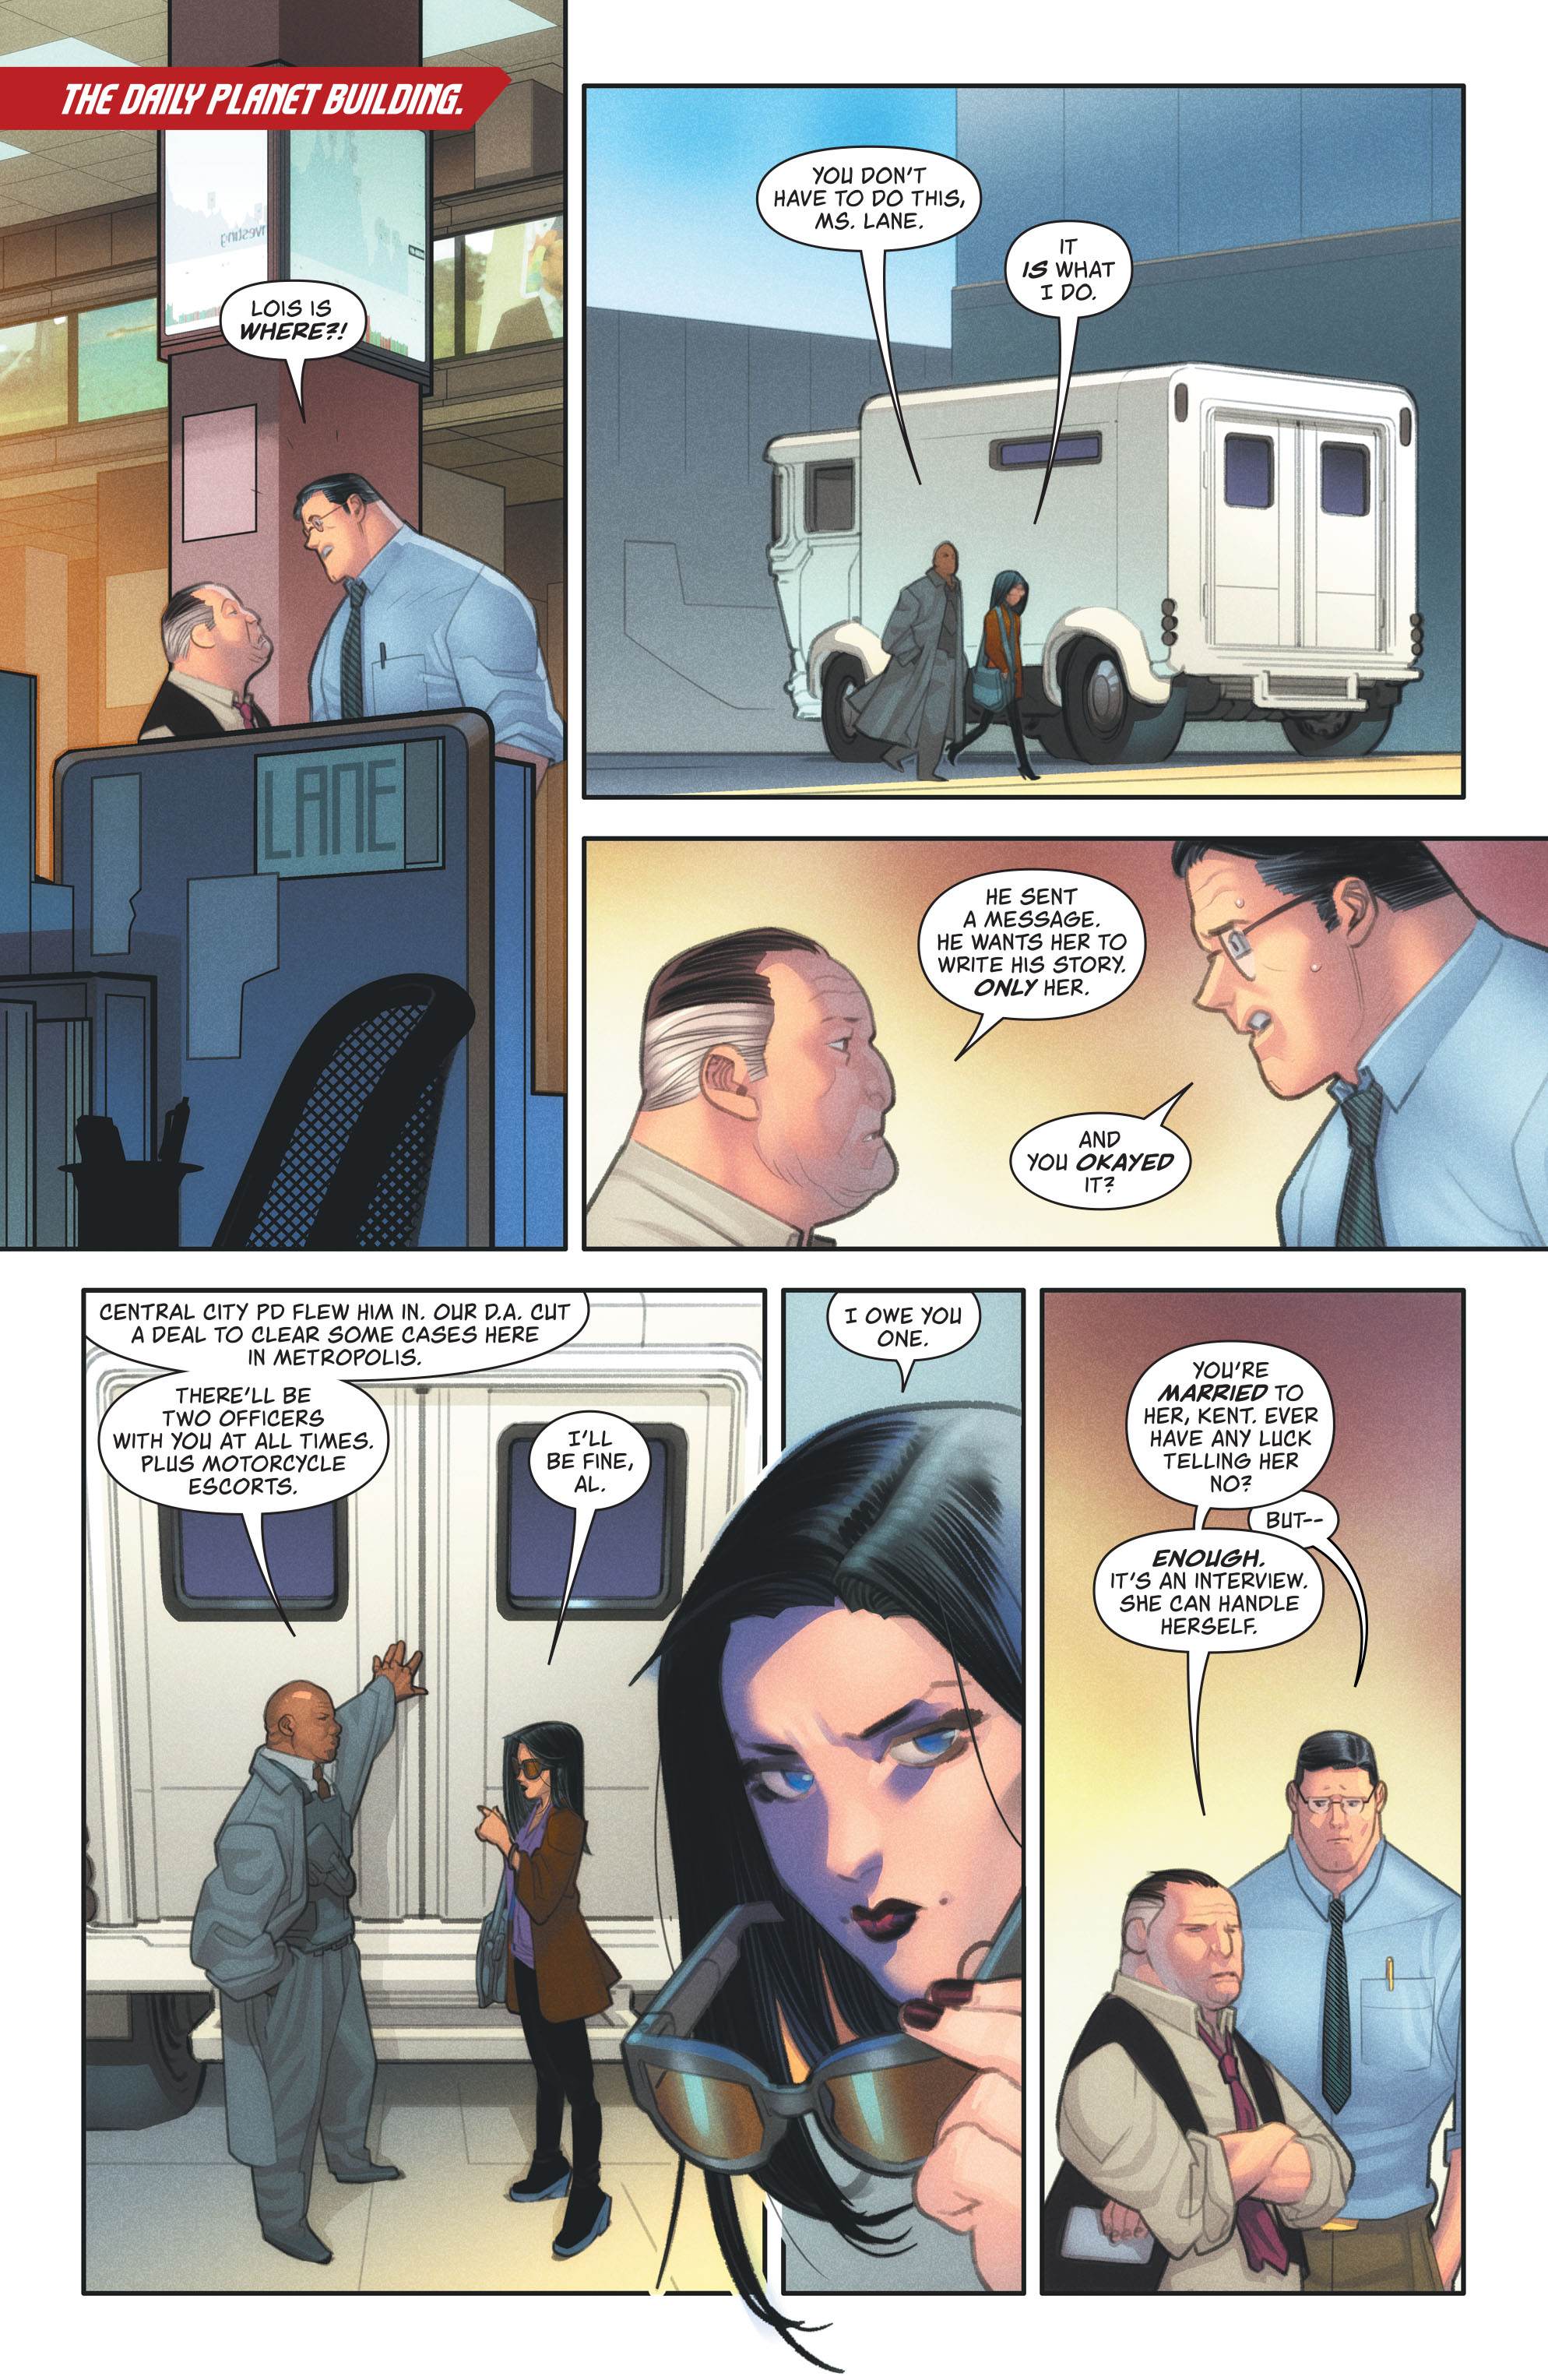 Superman: Man of Tomorrow (2020-): Chapter 13 - Page 2